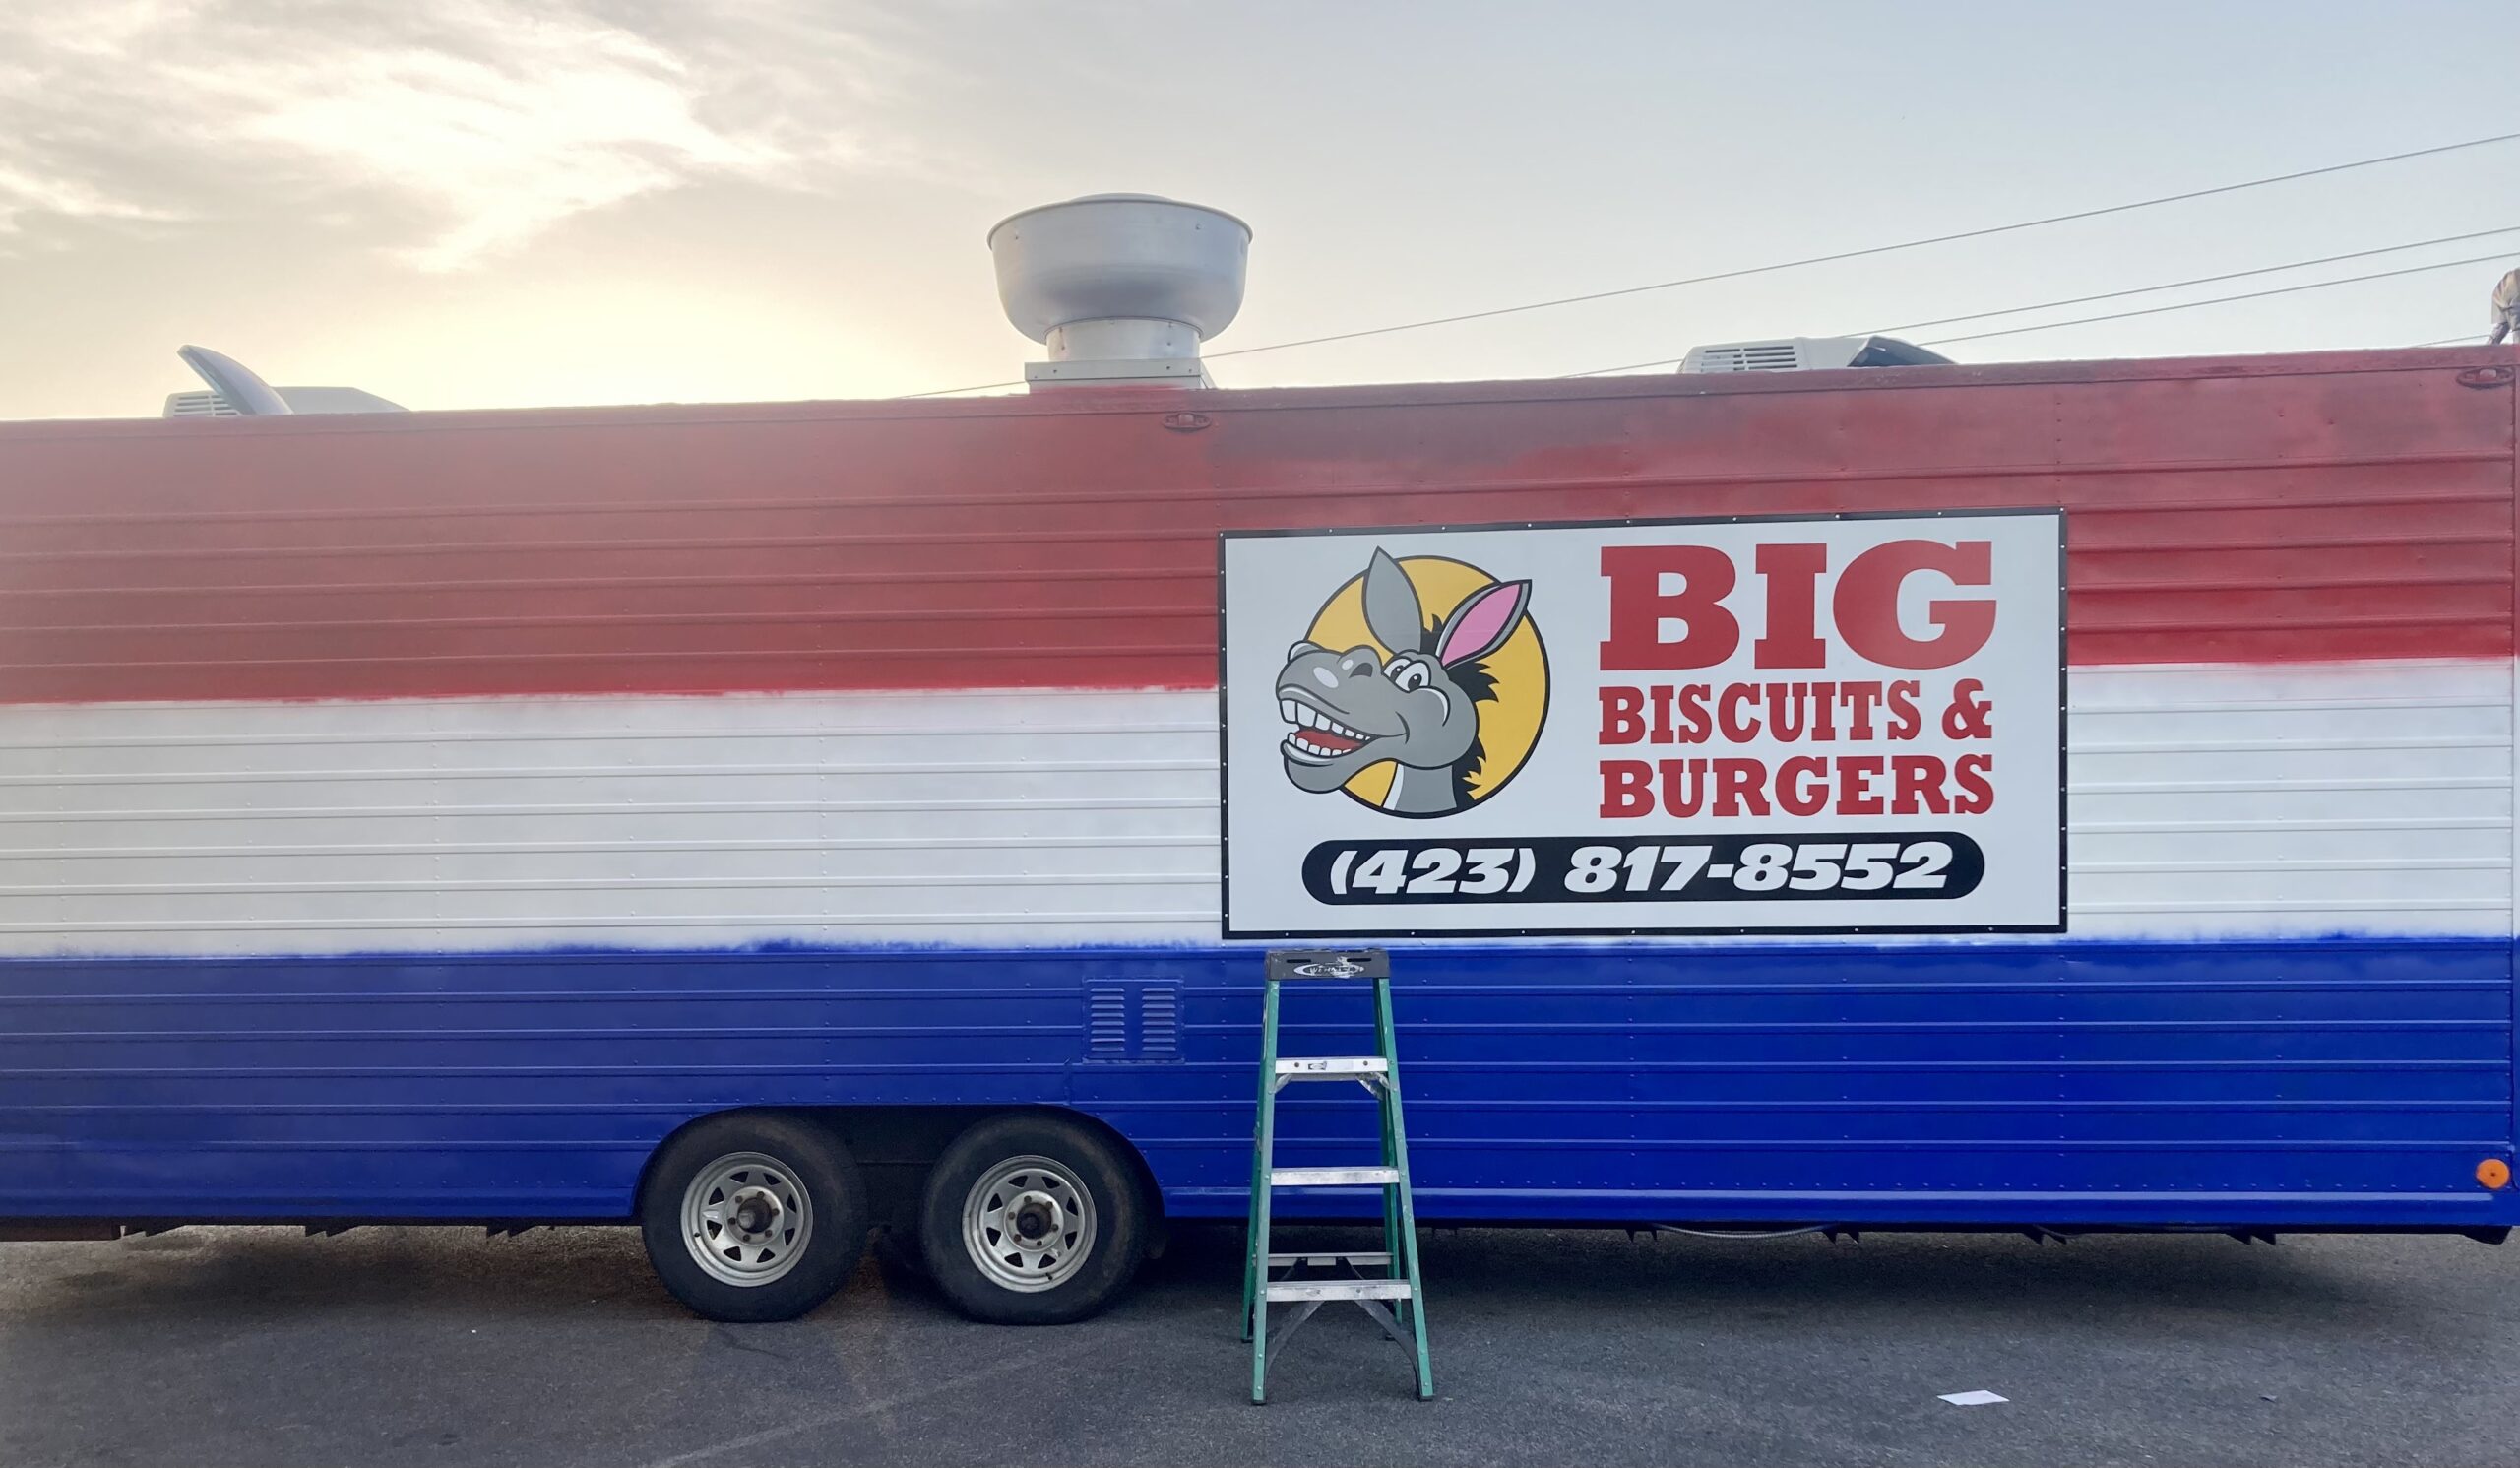 Big A$$ Burgers and Biscuits